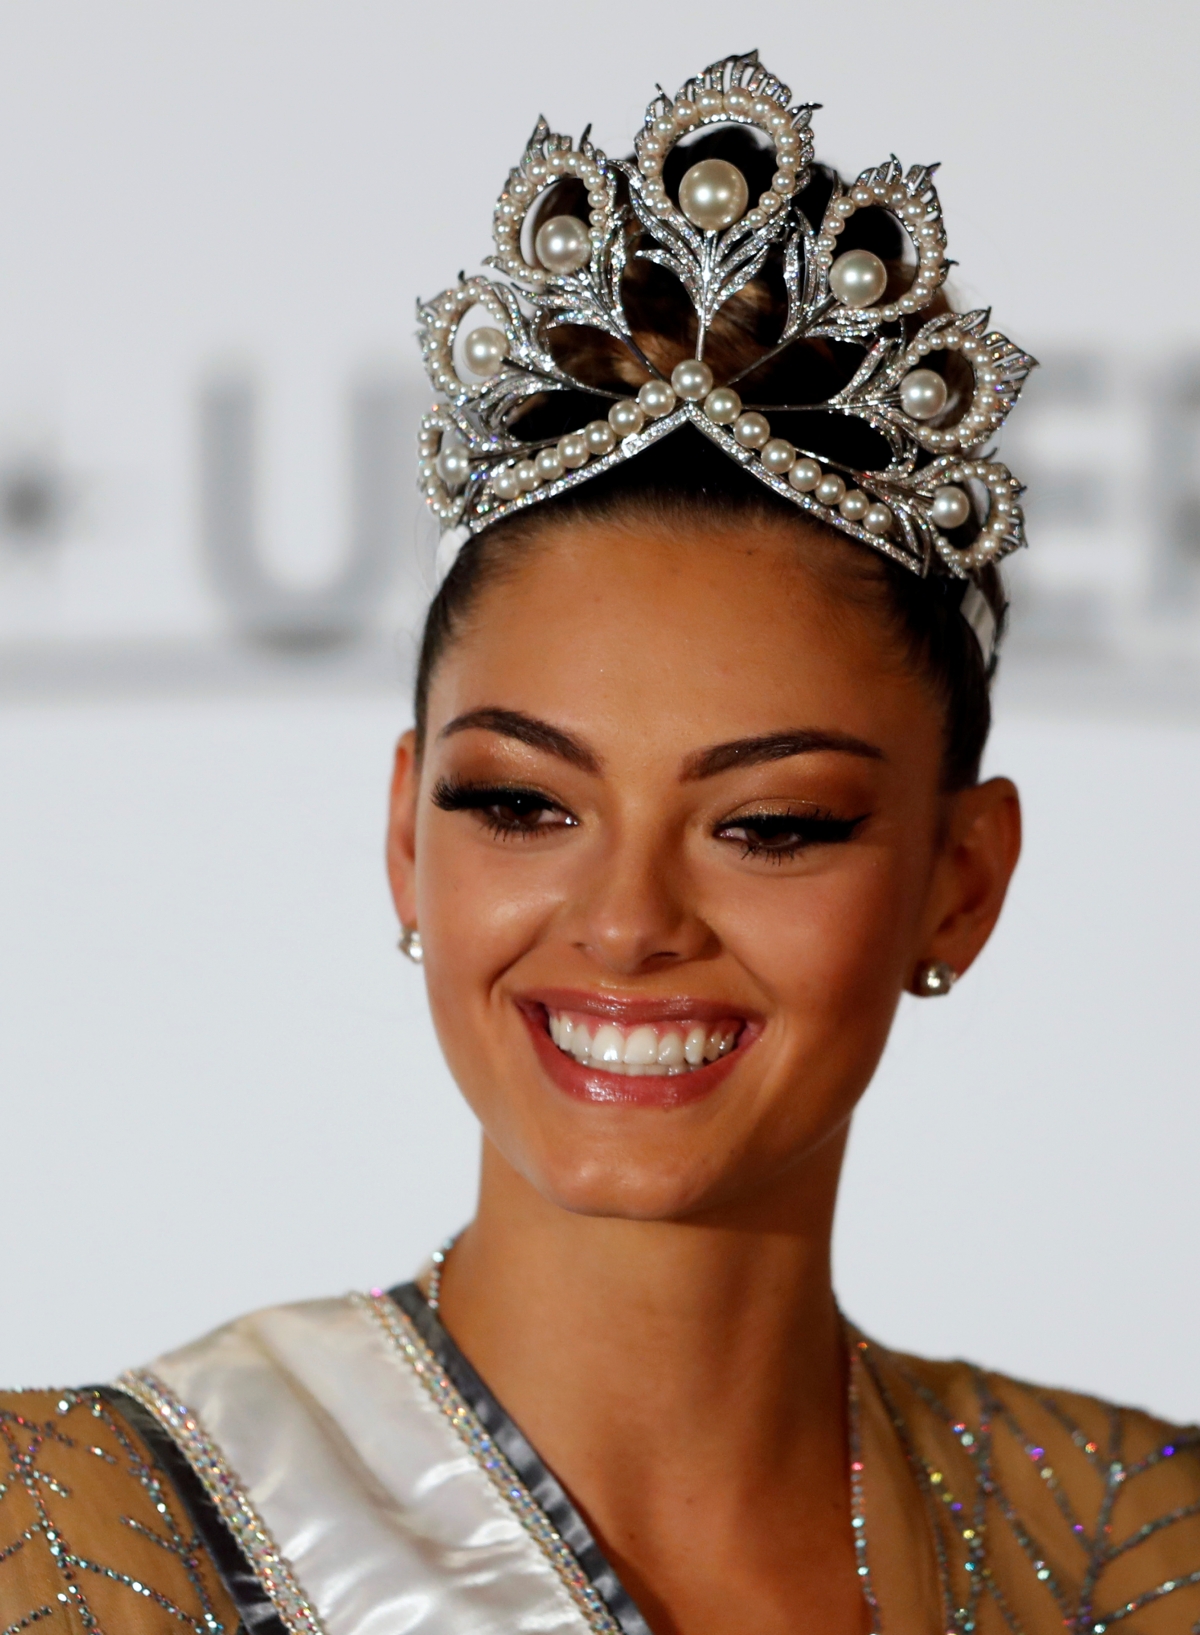 Demi-Leigh Nel-Peters of South Africa is crowned Miss 